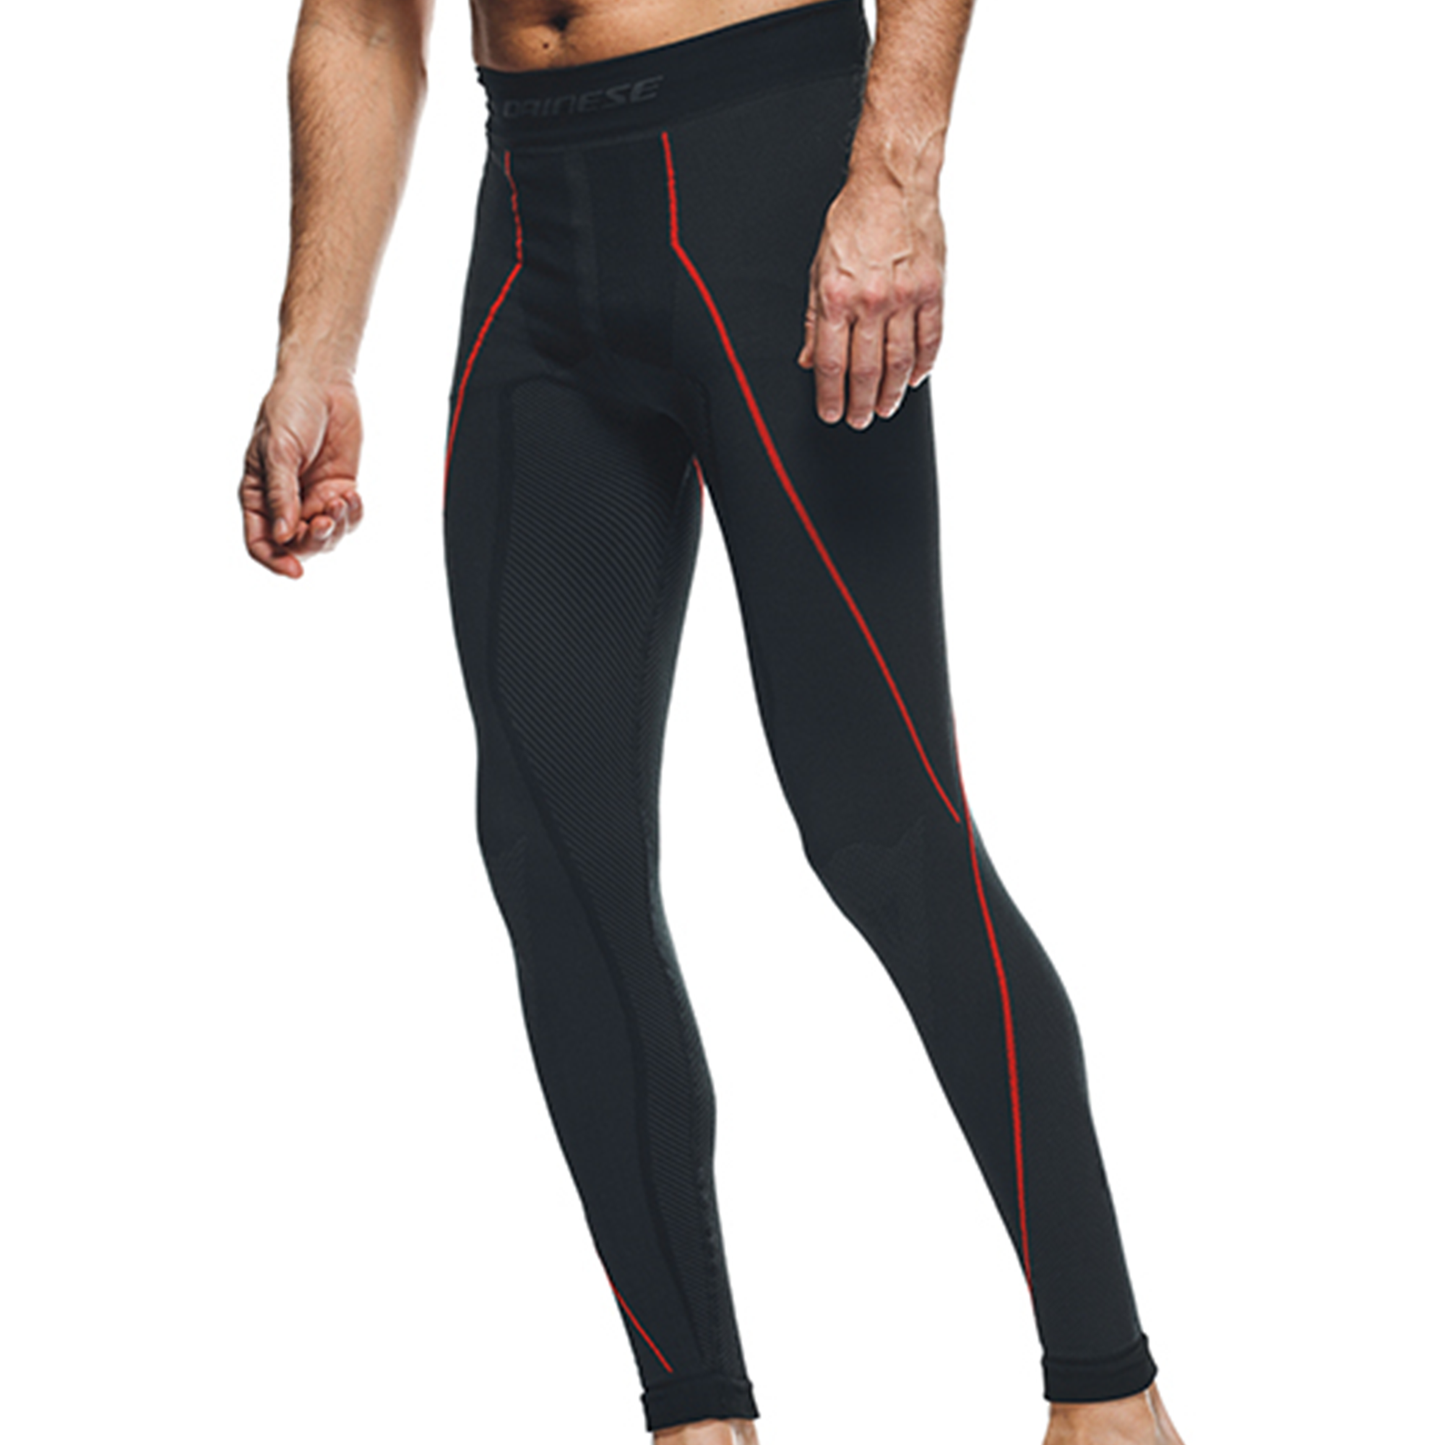 Dainese Thermo Pants - Black/Red (606)